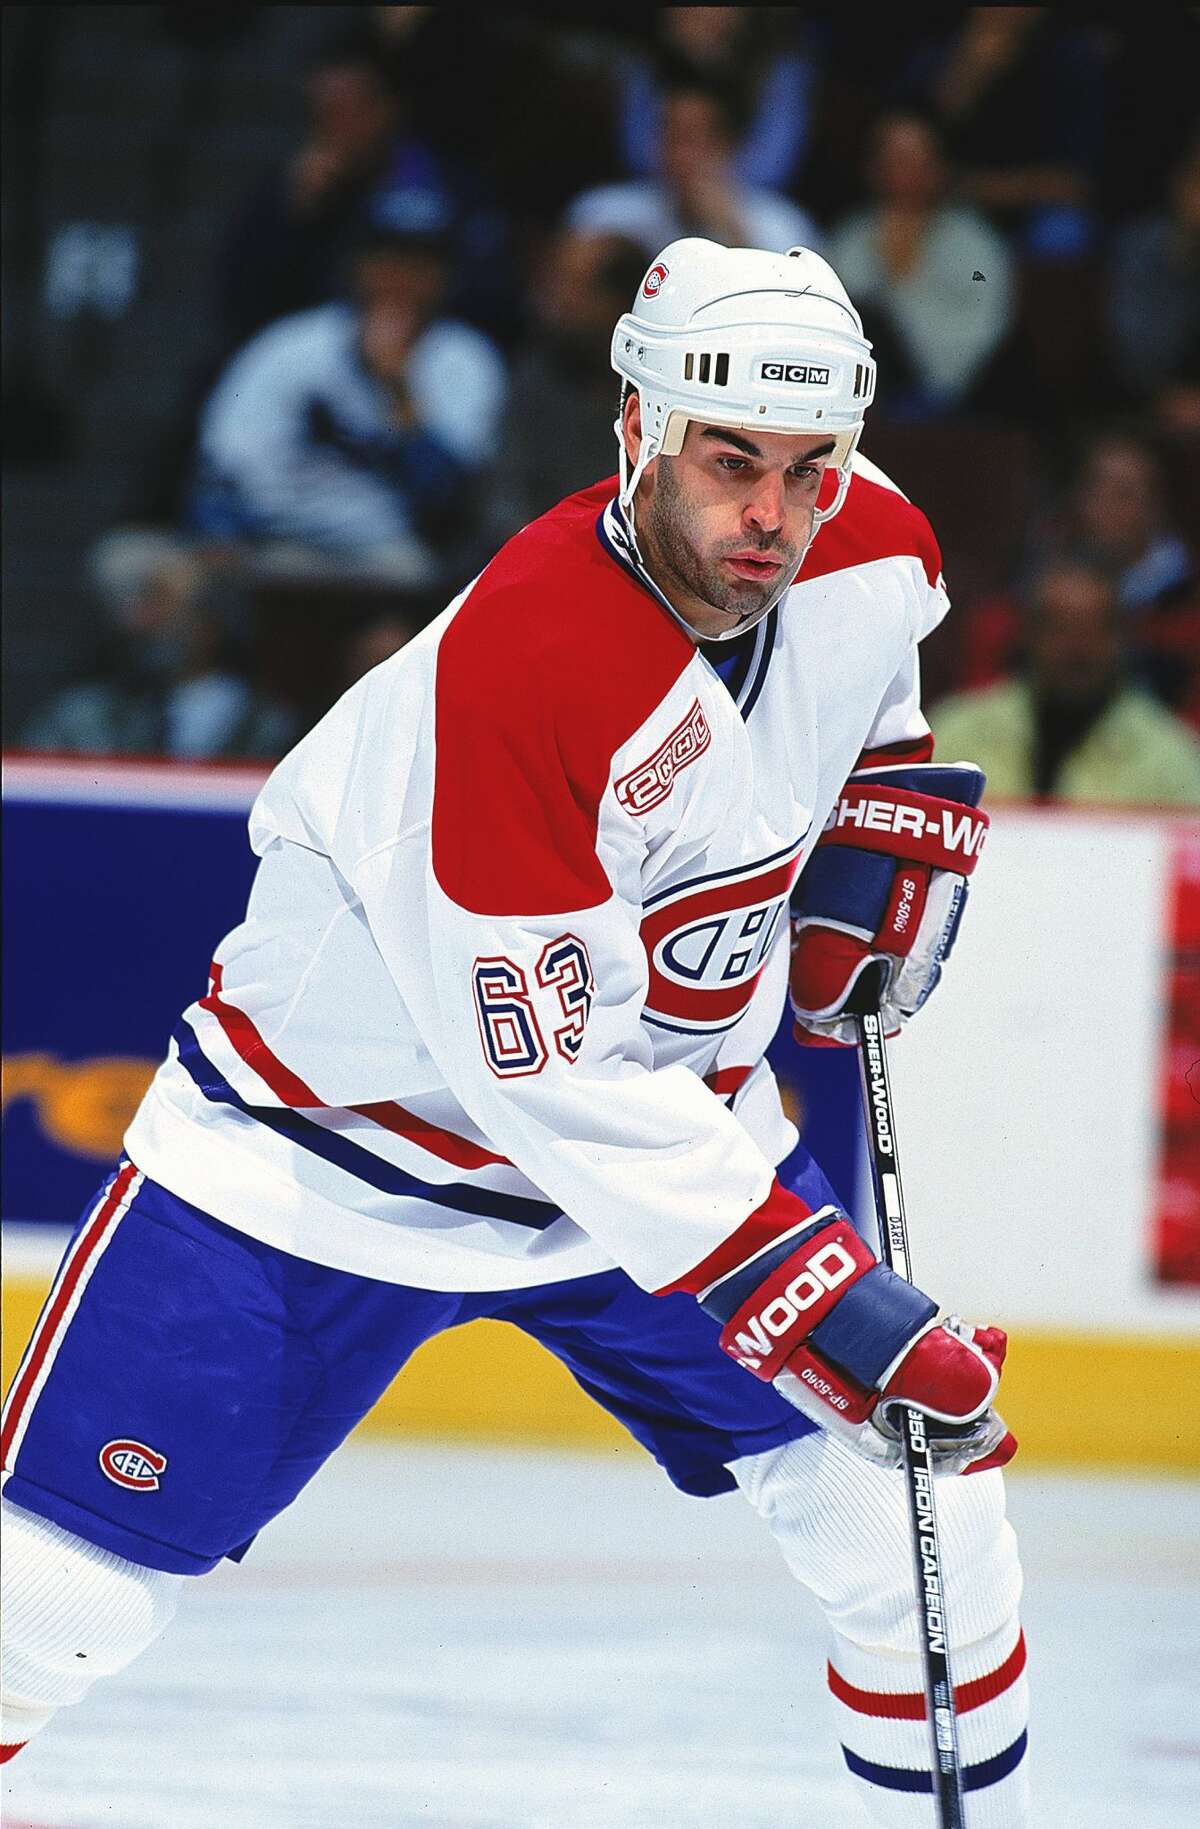 12 Oct 1999: Craig Darby #63 of the Montreal Canadiens moves on the ice during a game against the Florida Panthers at the Molson Centre in Montreal, Canada. The Panthers defeated the Canadiens 2-1. Mandatory Credit: Robert Laberge /Allsport